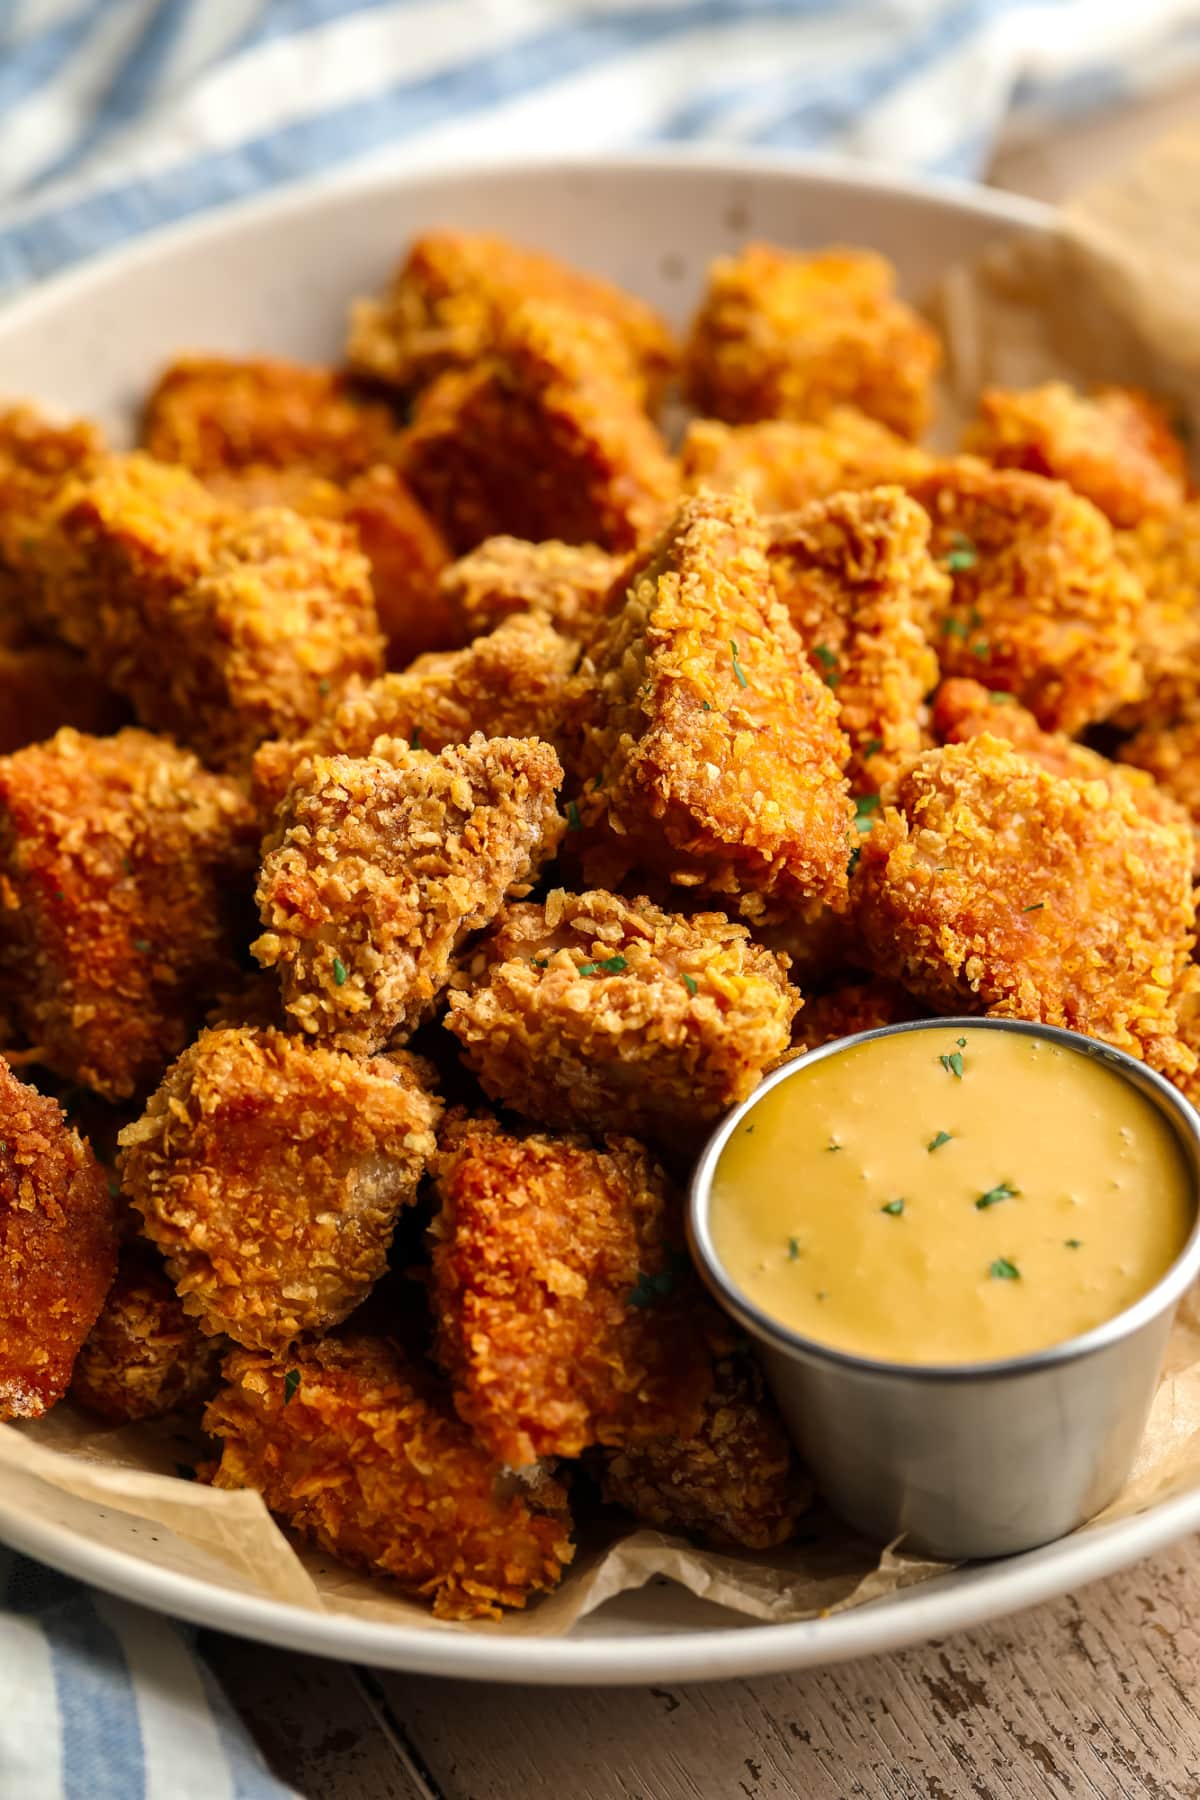 crispy breaded vegan chicken nuggets in a shallow bowl with yellow dipping sauce, blue towel in background